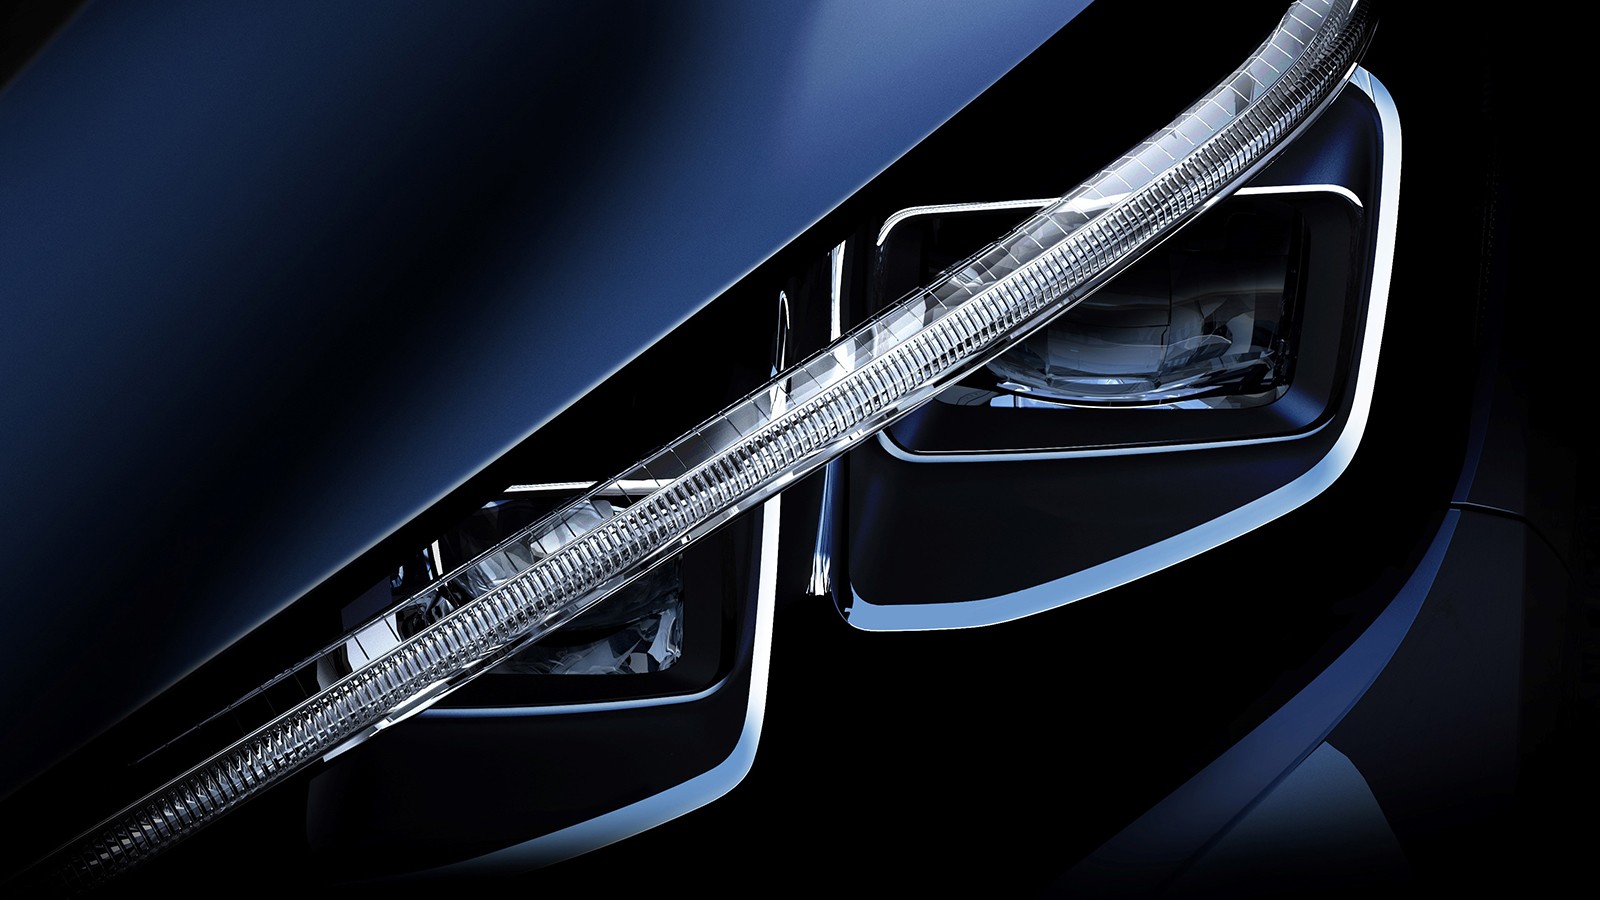 Amazing is worth waiting for. The New #Nissan #LEAF, coming soon